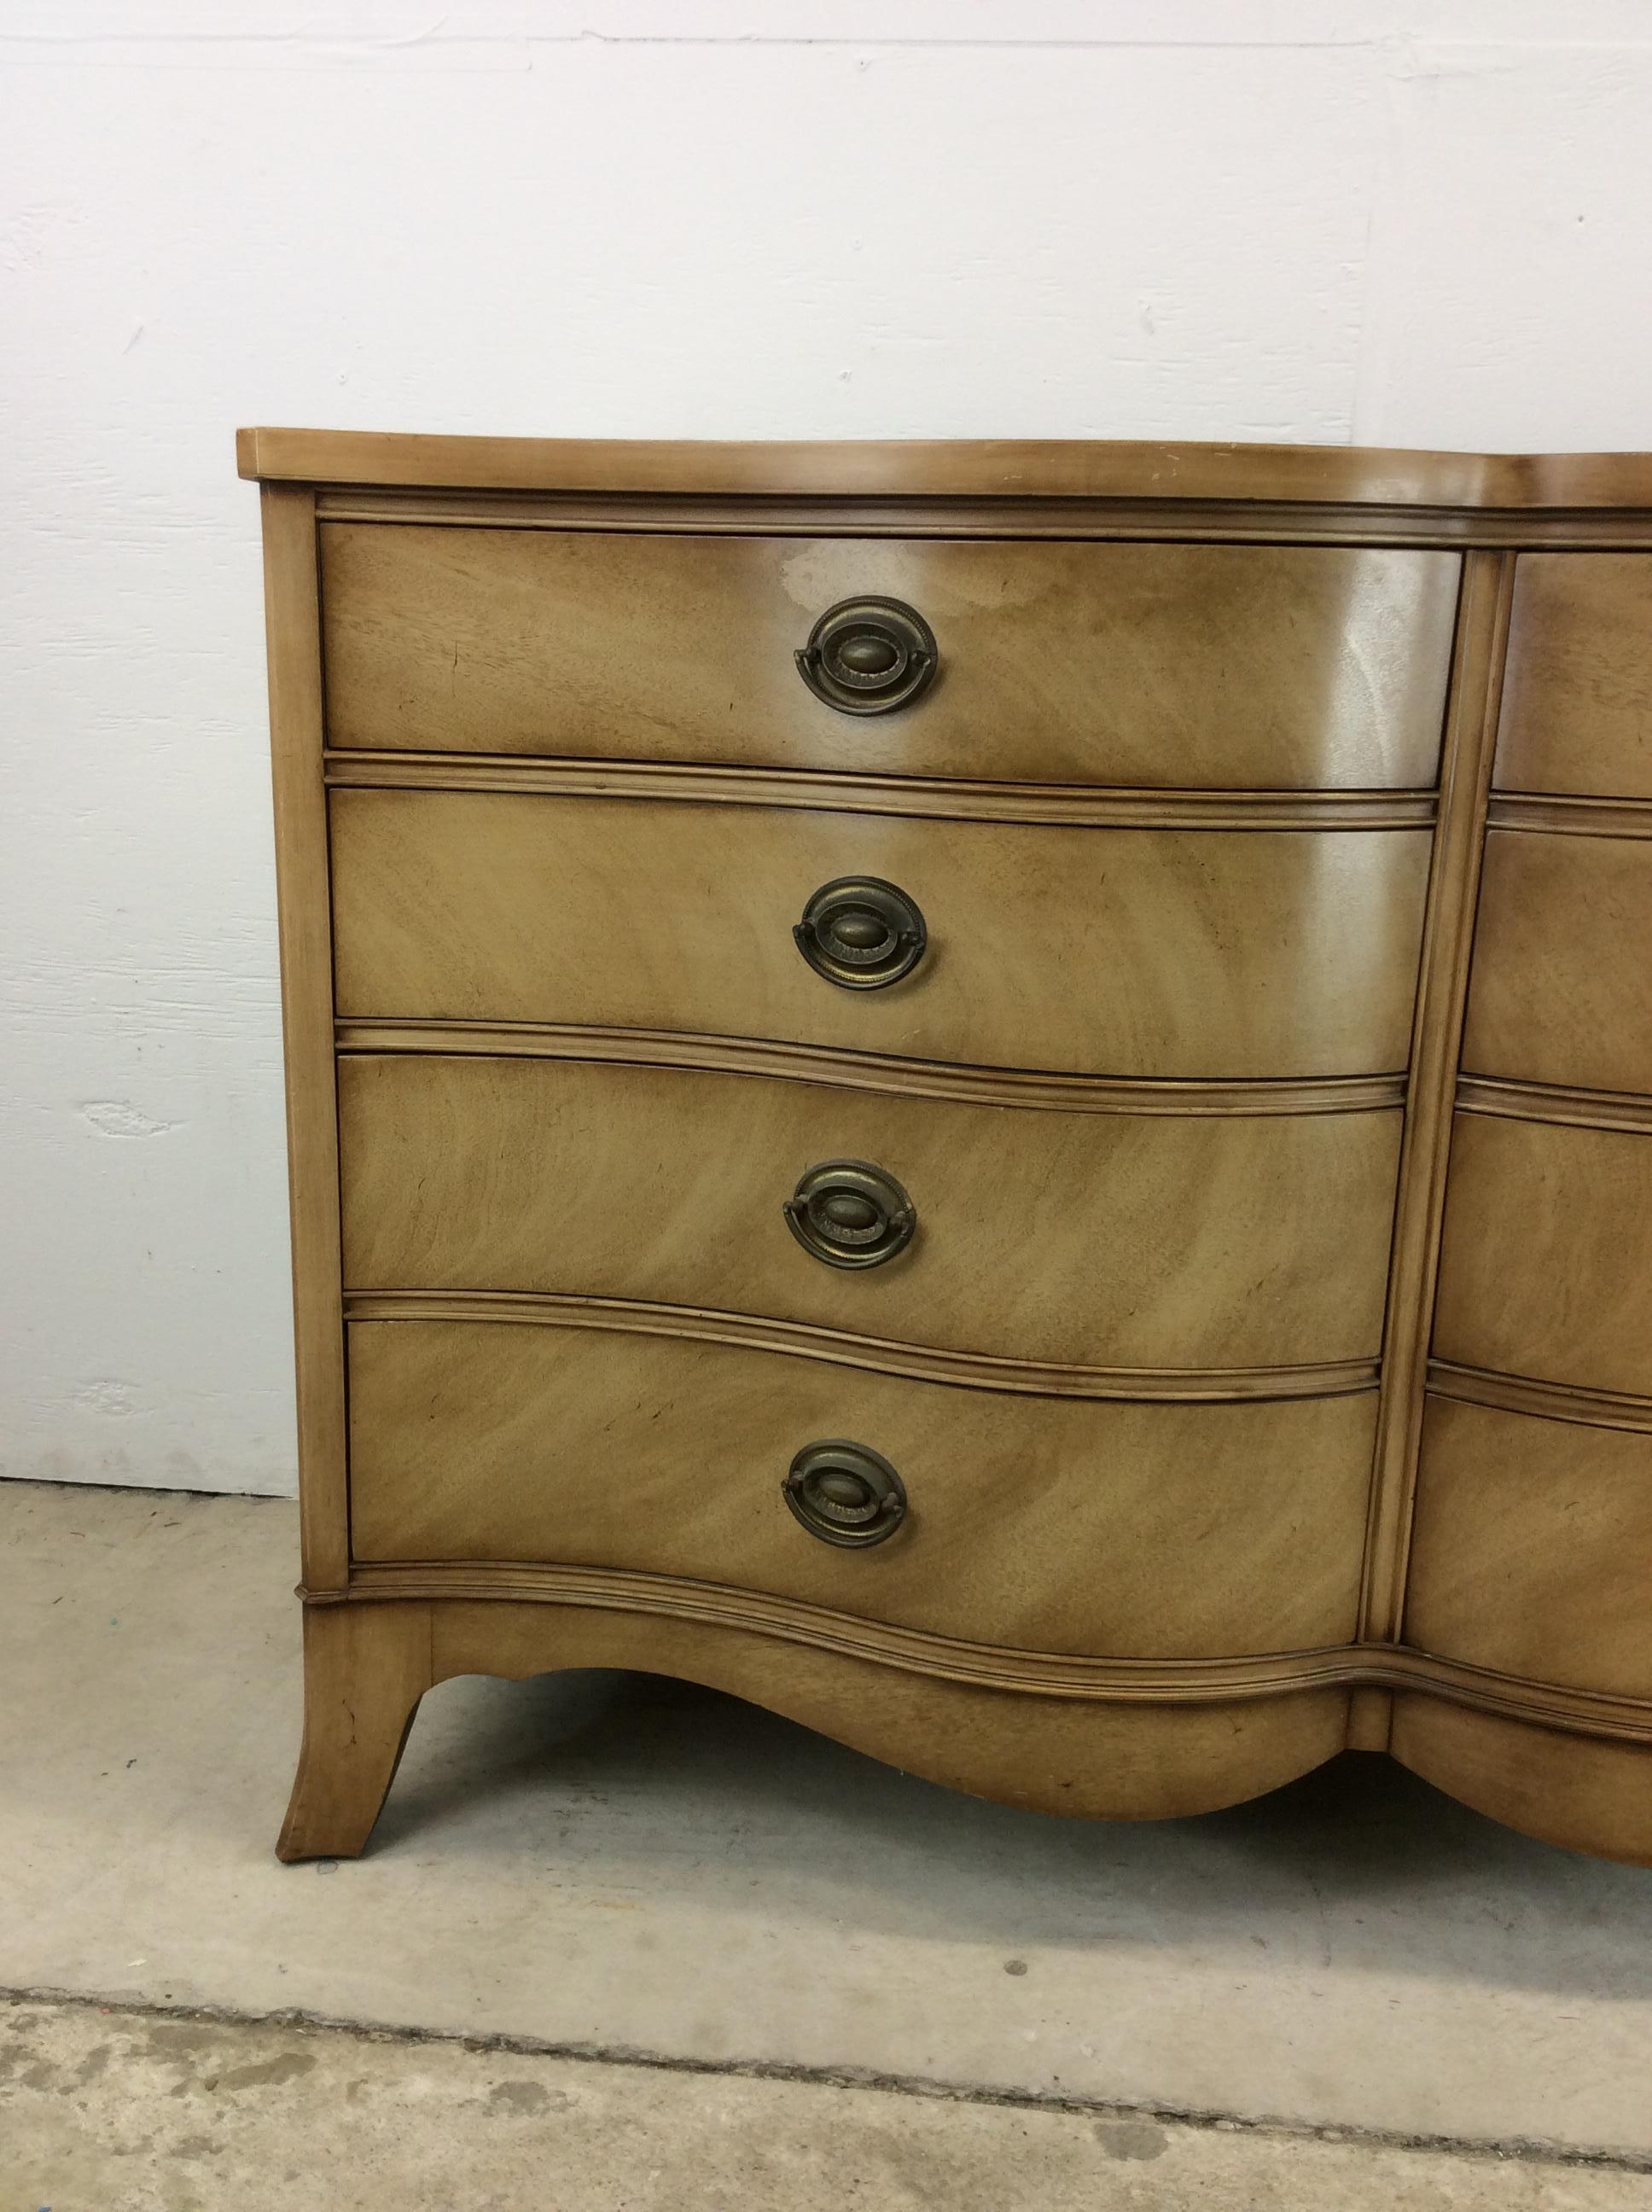 This mid century eight drawer dresser by Drexel features hardwood construction, bleached walnut veneer with original finish, traditional brass hardware, curved drawer fronts, and tapered legs.

Matching single nightstand, wall mirror & highboy